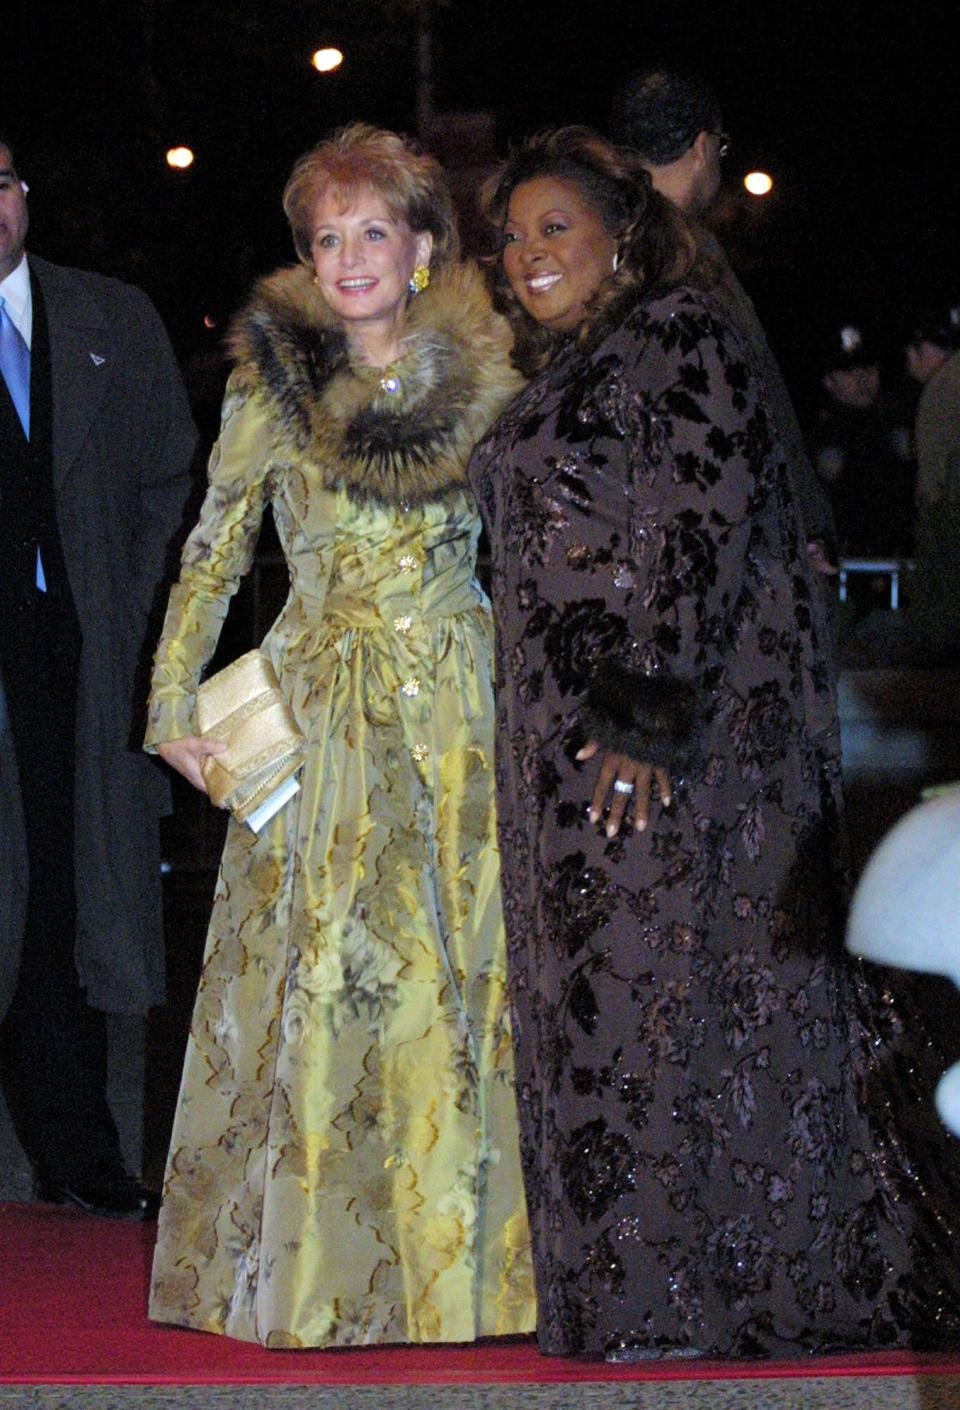 Original "The View" co-host Star Jones recalled attending events with Barbara Walters in a tribute show for the trailblazing journalist. Here, the two attended the wedding of Michael Douglas and Catherine Zeta-Jones in November 2000.